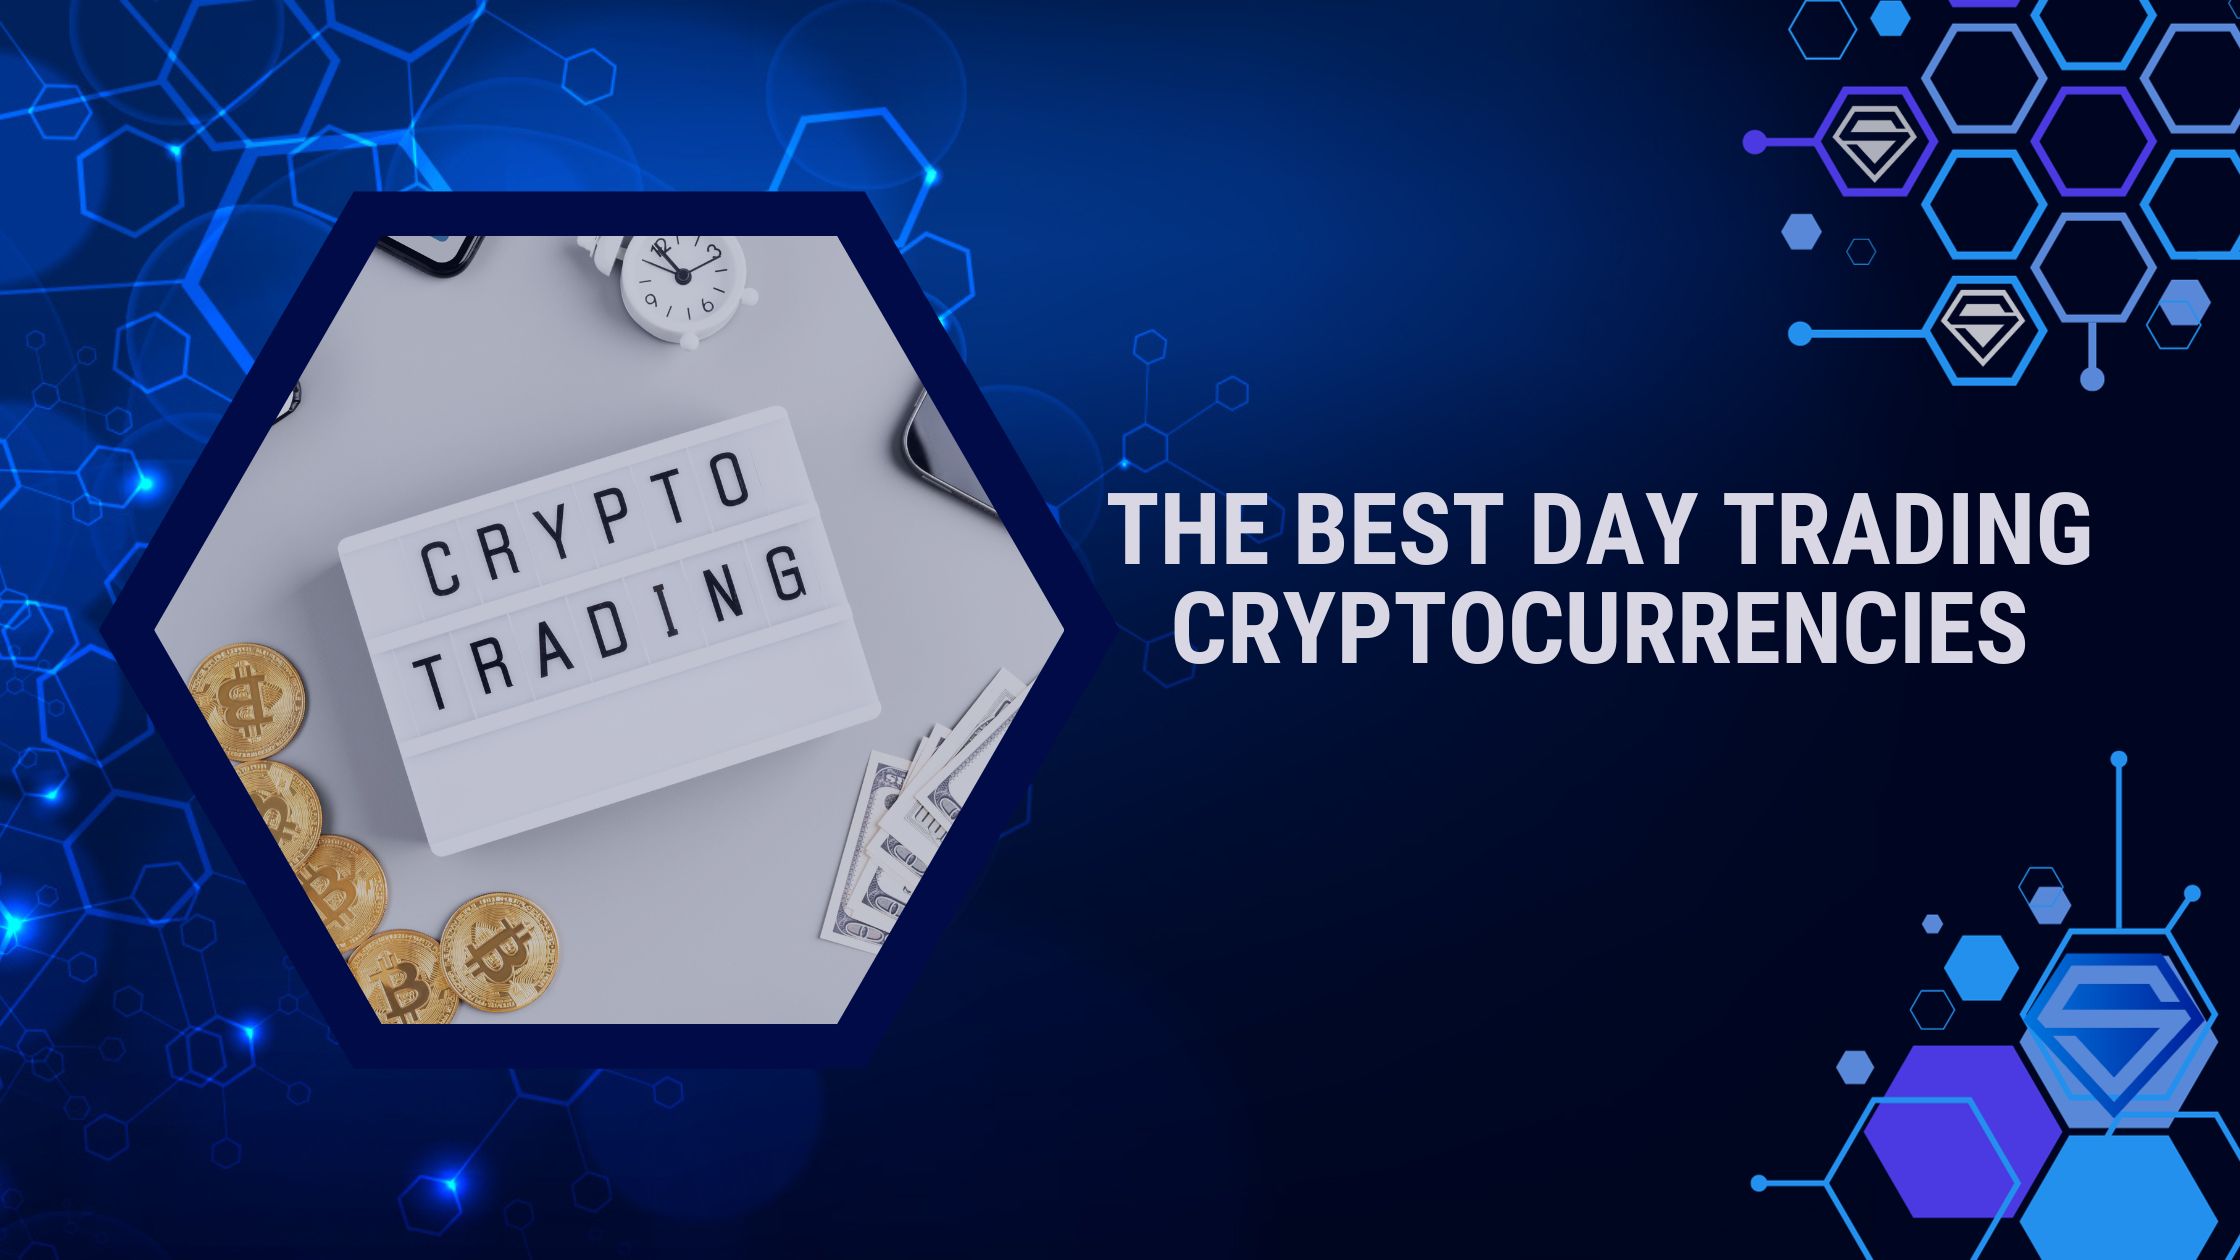 The Best Day Trading Cryptocurrencies